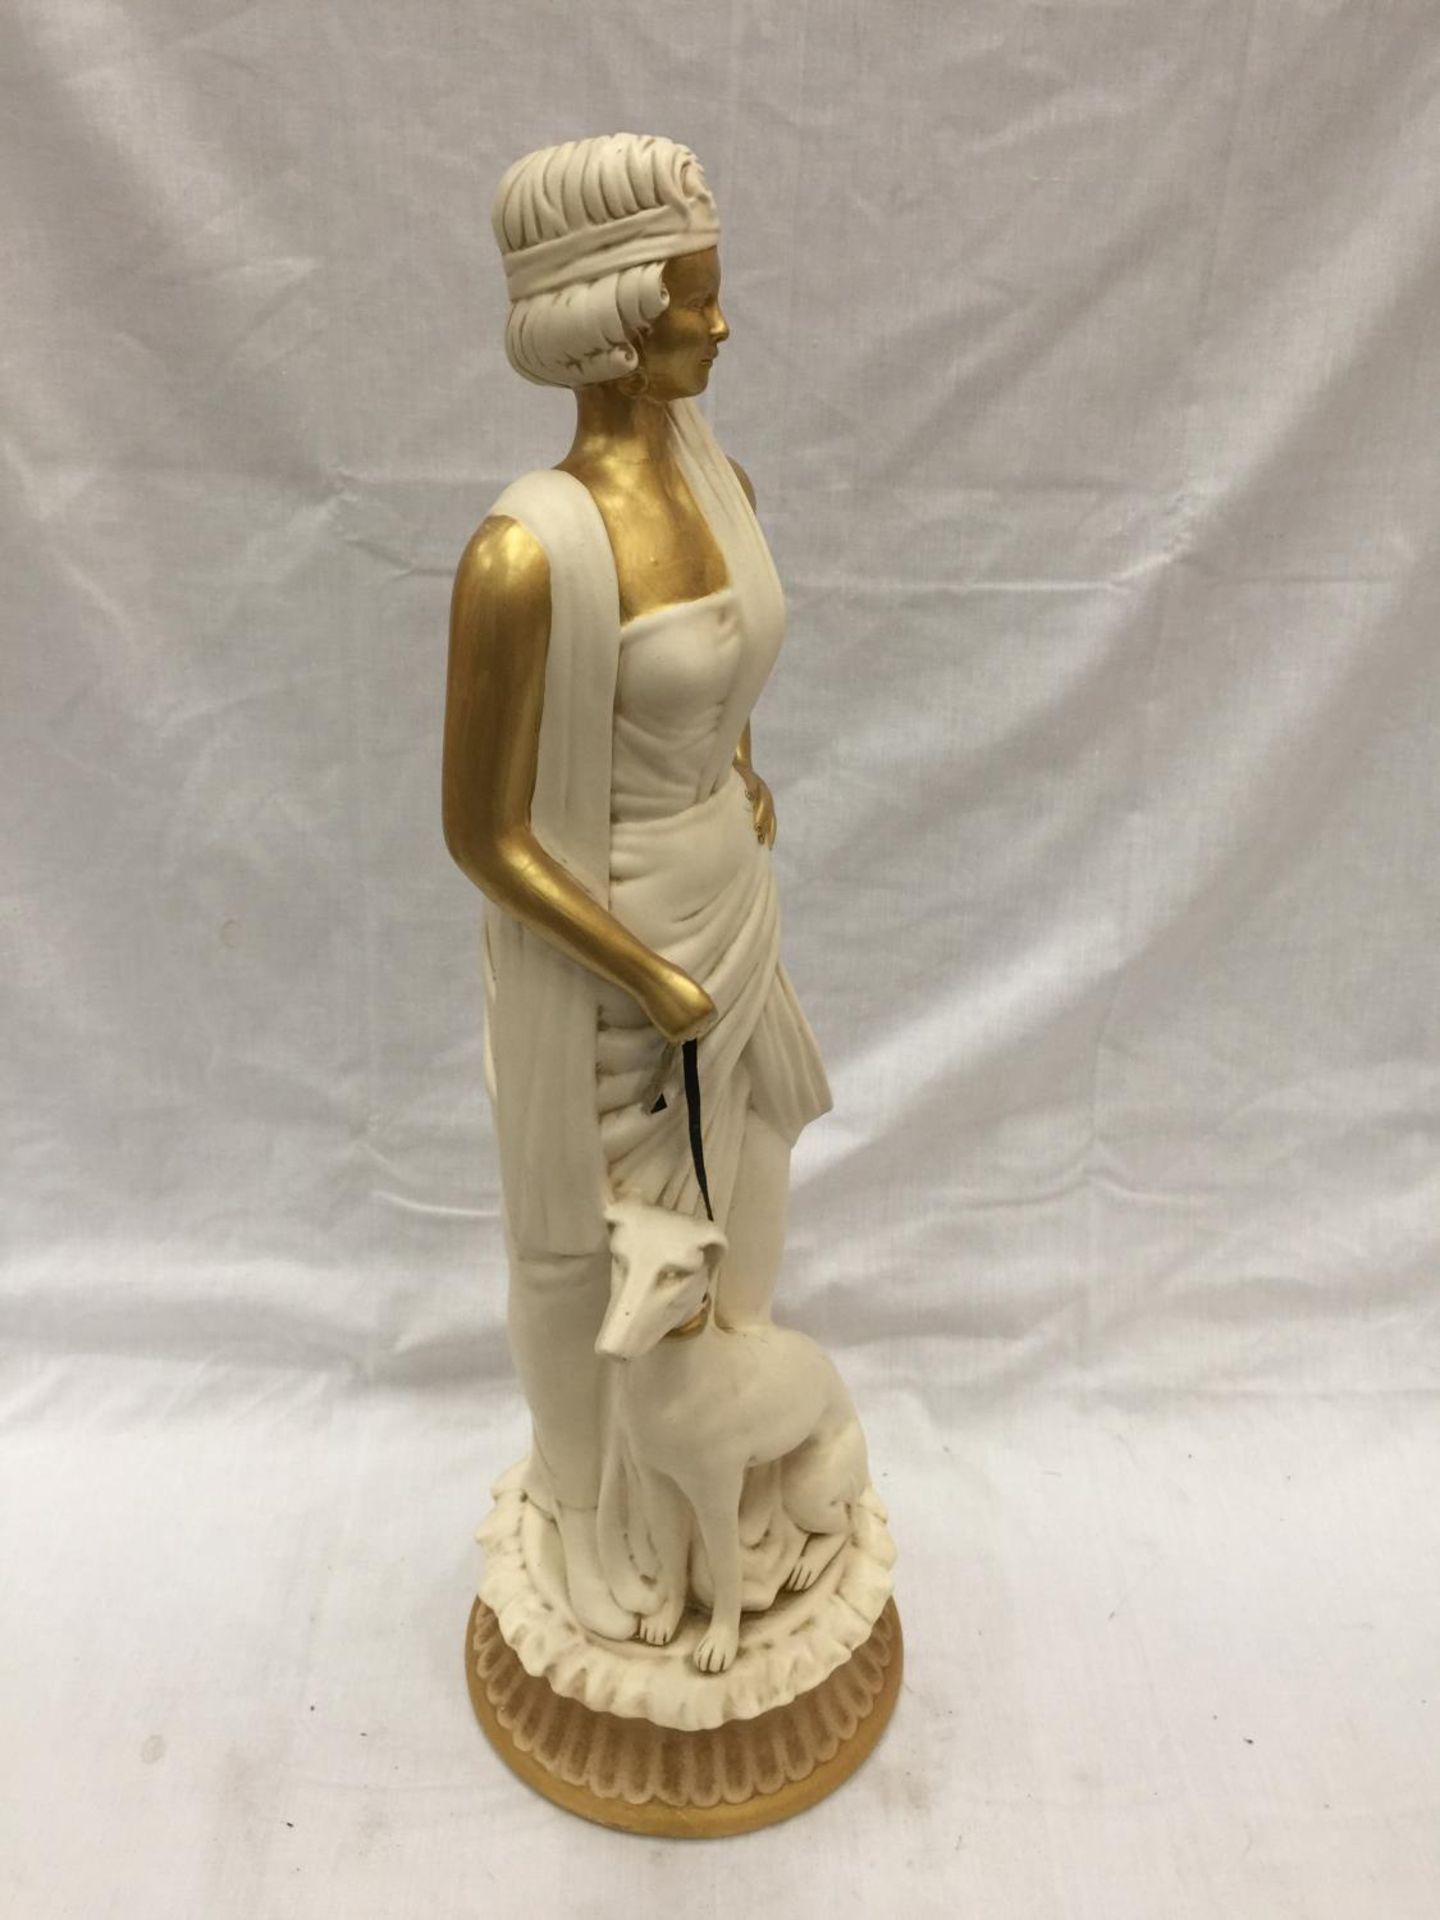 A FLOOR STANDING ART DECO STYLE FIGURE HEIGHT APPROX 72CM, SIGNATURE TO BASE - Image 3 of 5